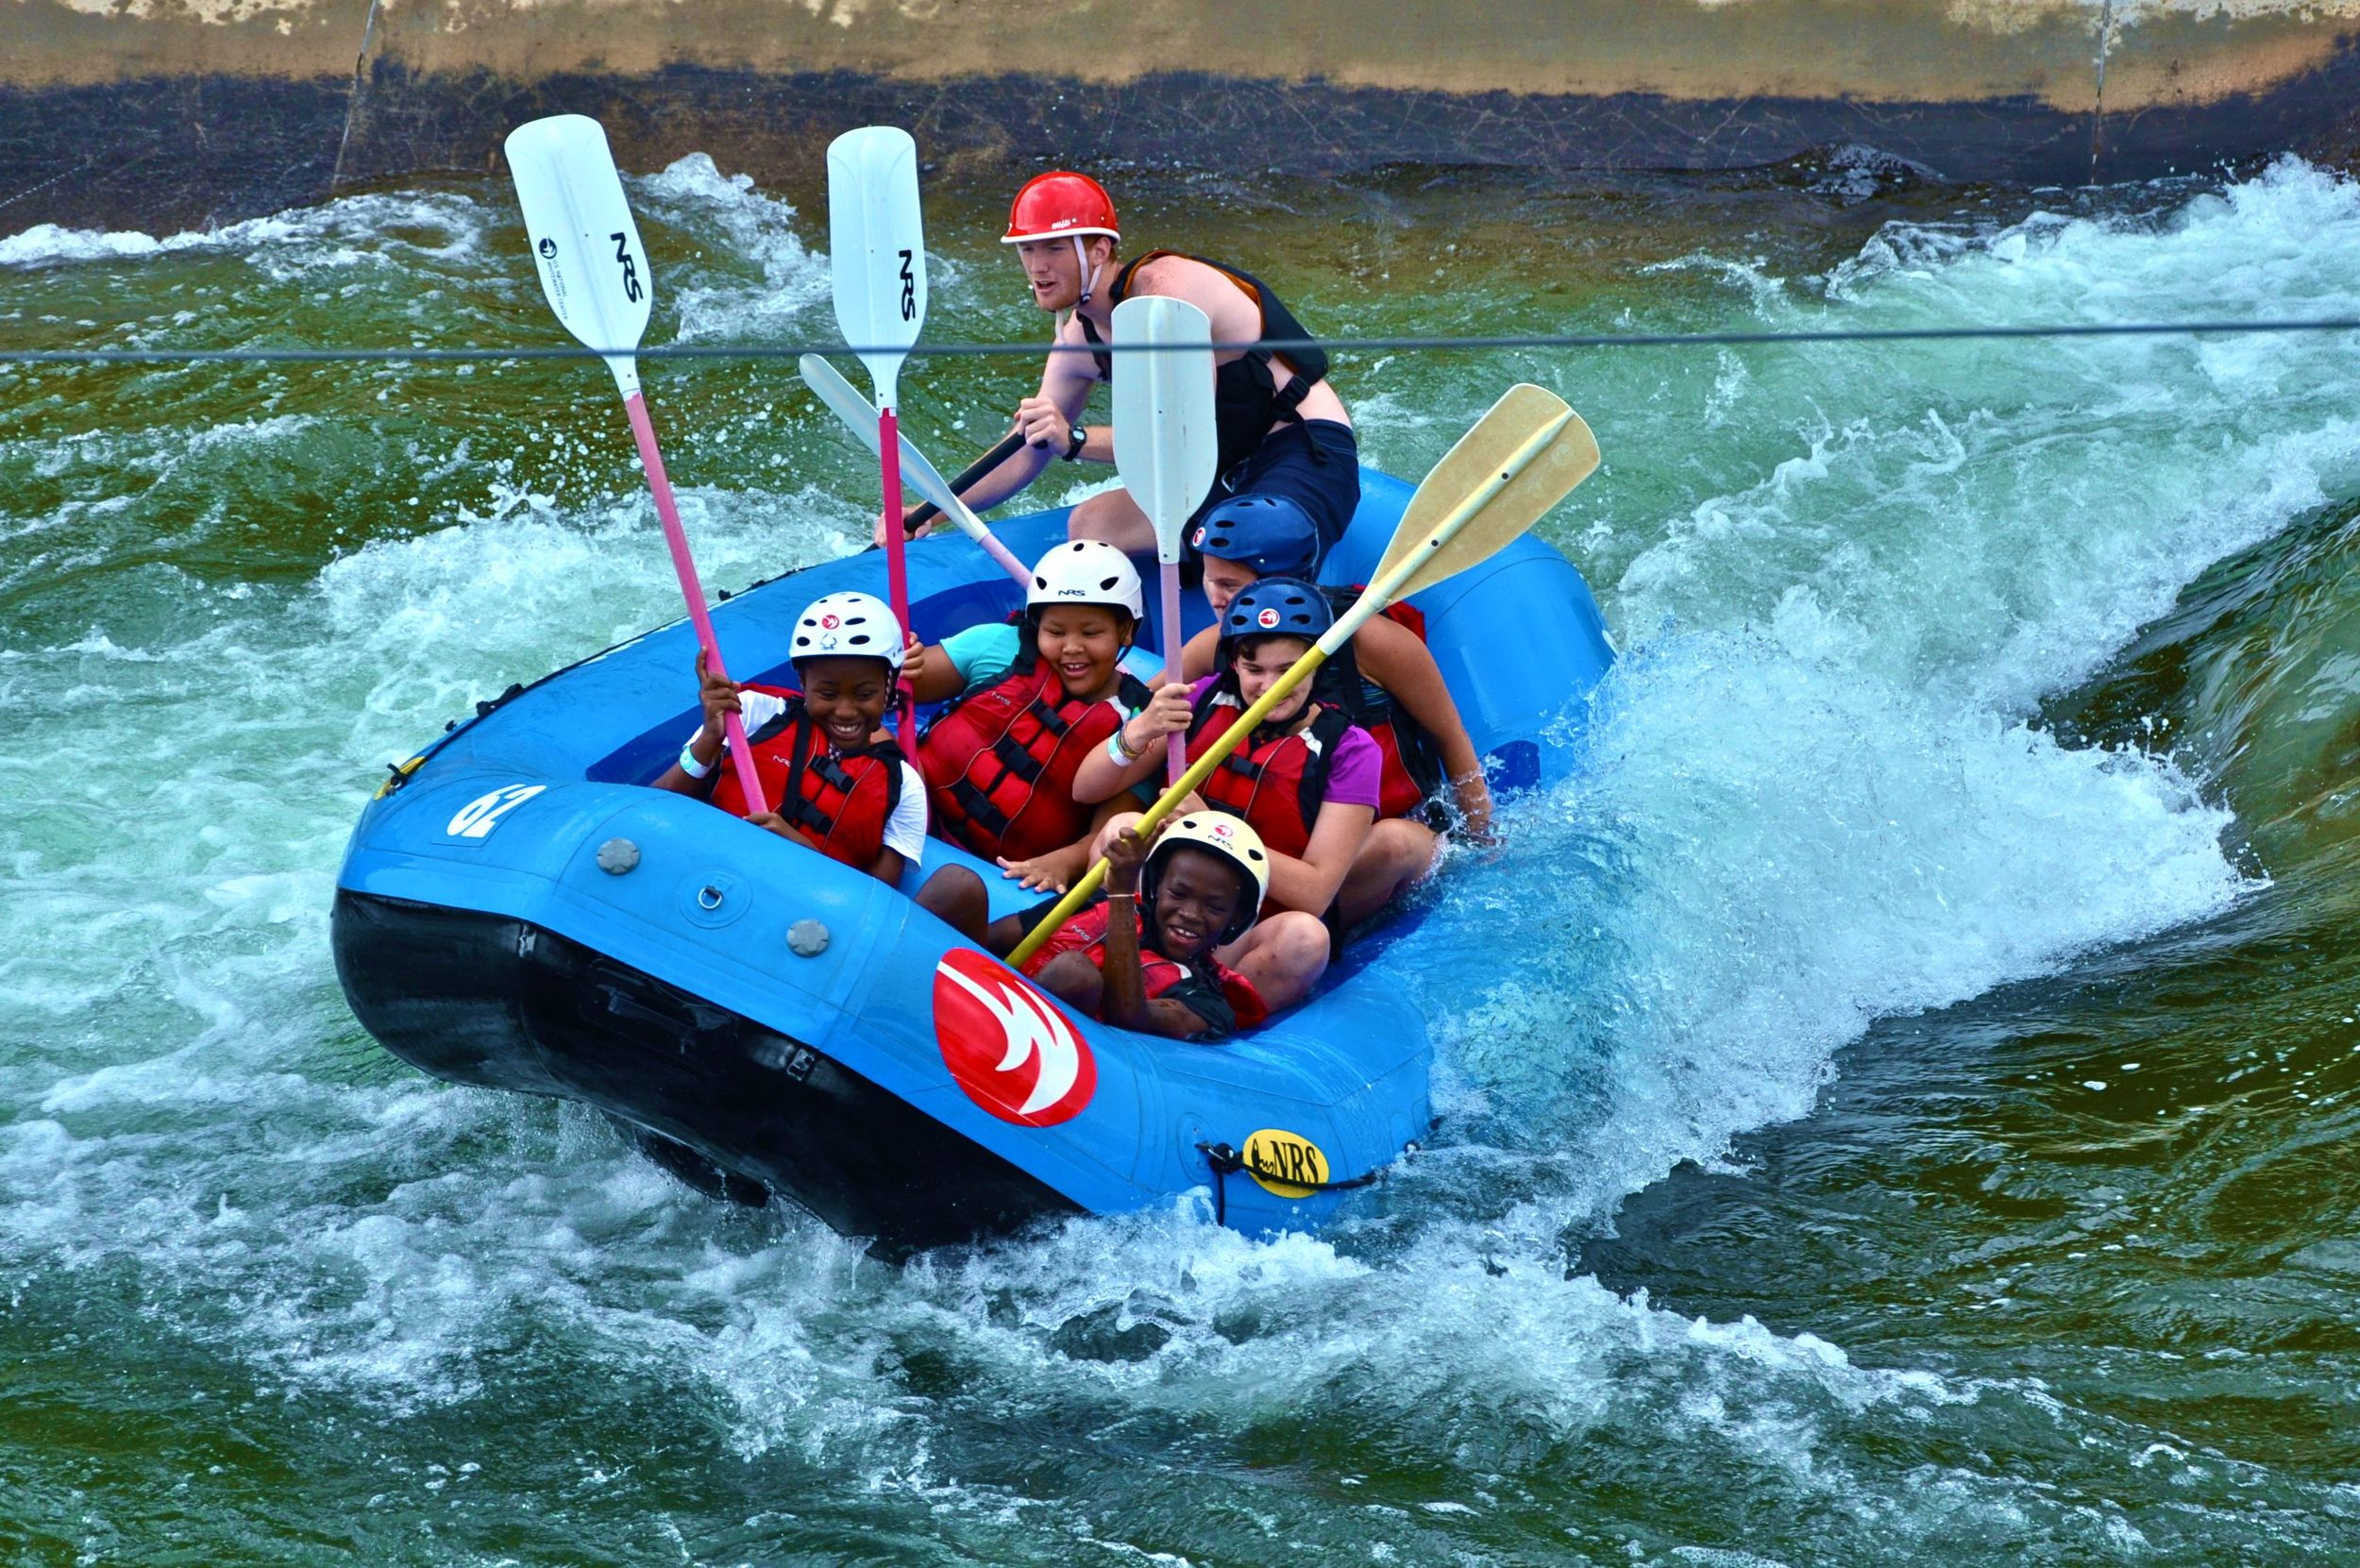 cynia-jazel-regianna-michelle-and-marguerite-go-22surfing22-during-whitewater-rafting.jpg